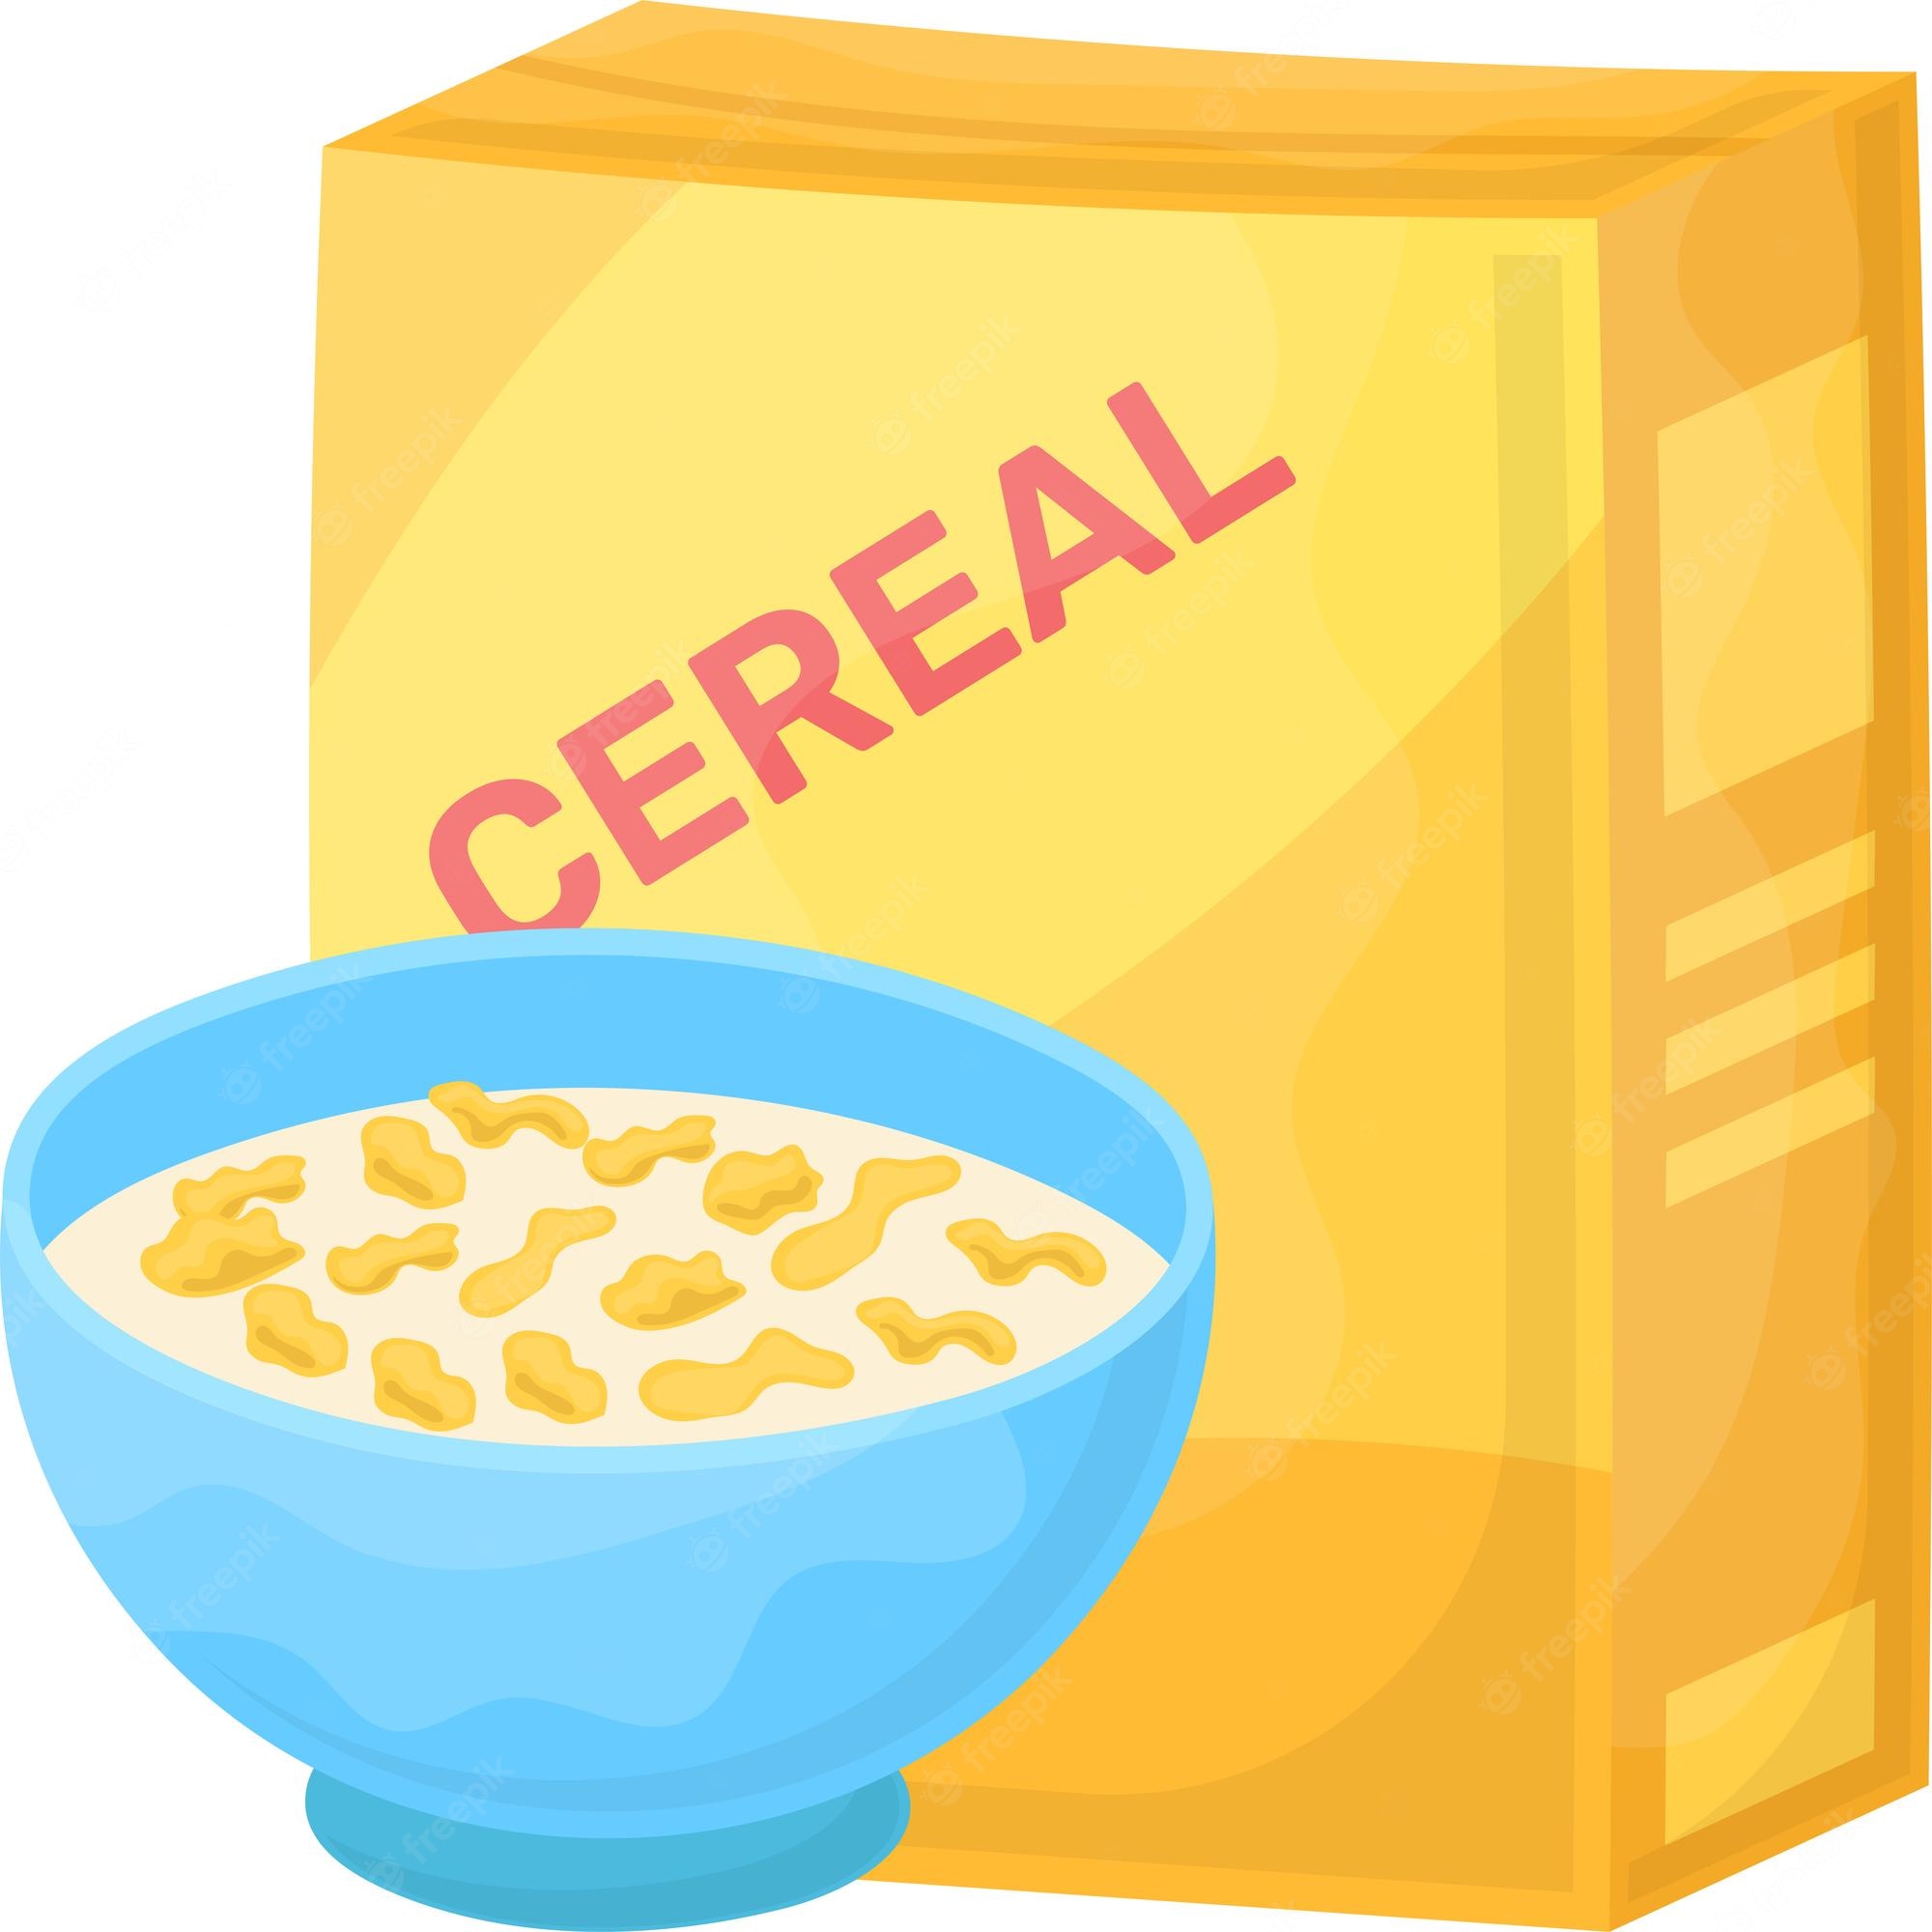 How to Draw a Cereal Box - HelloArtsy